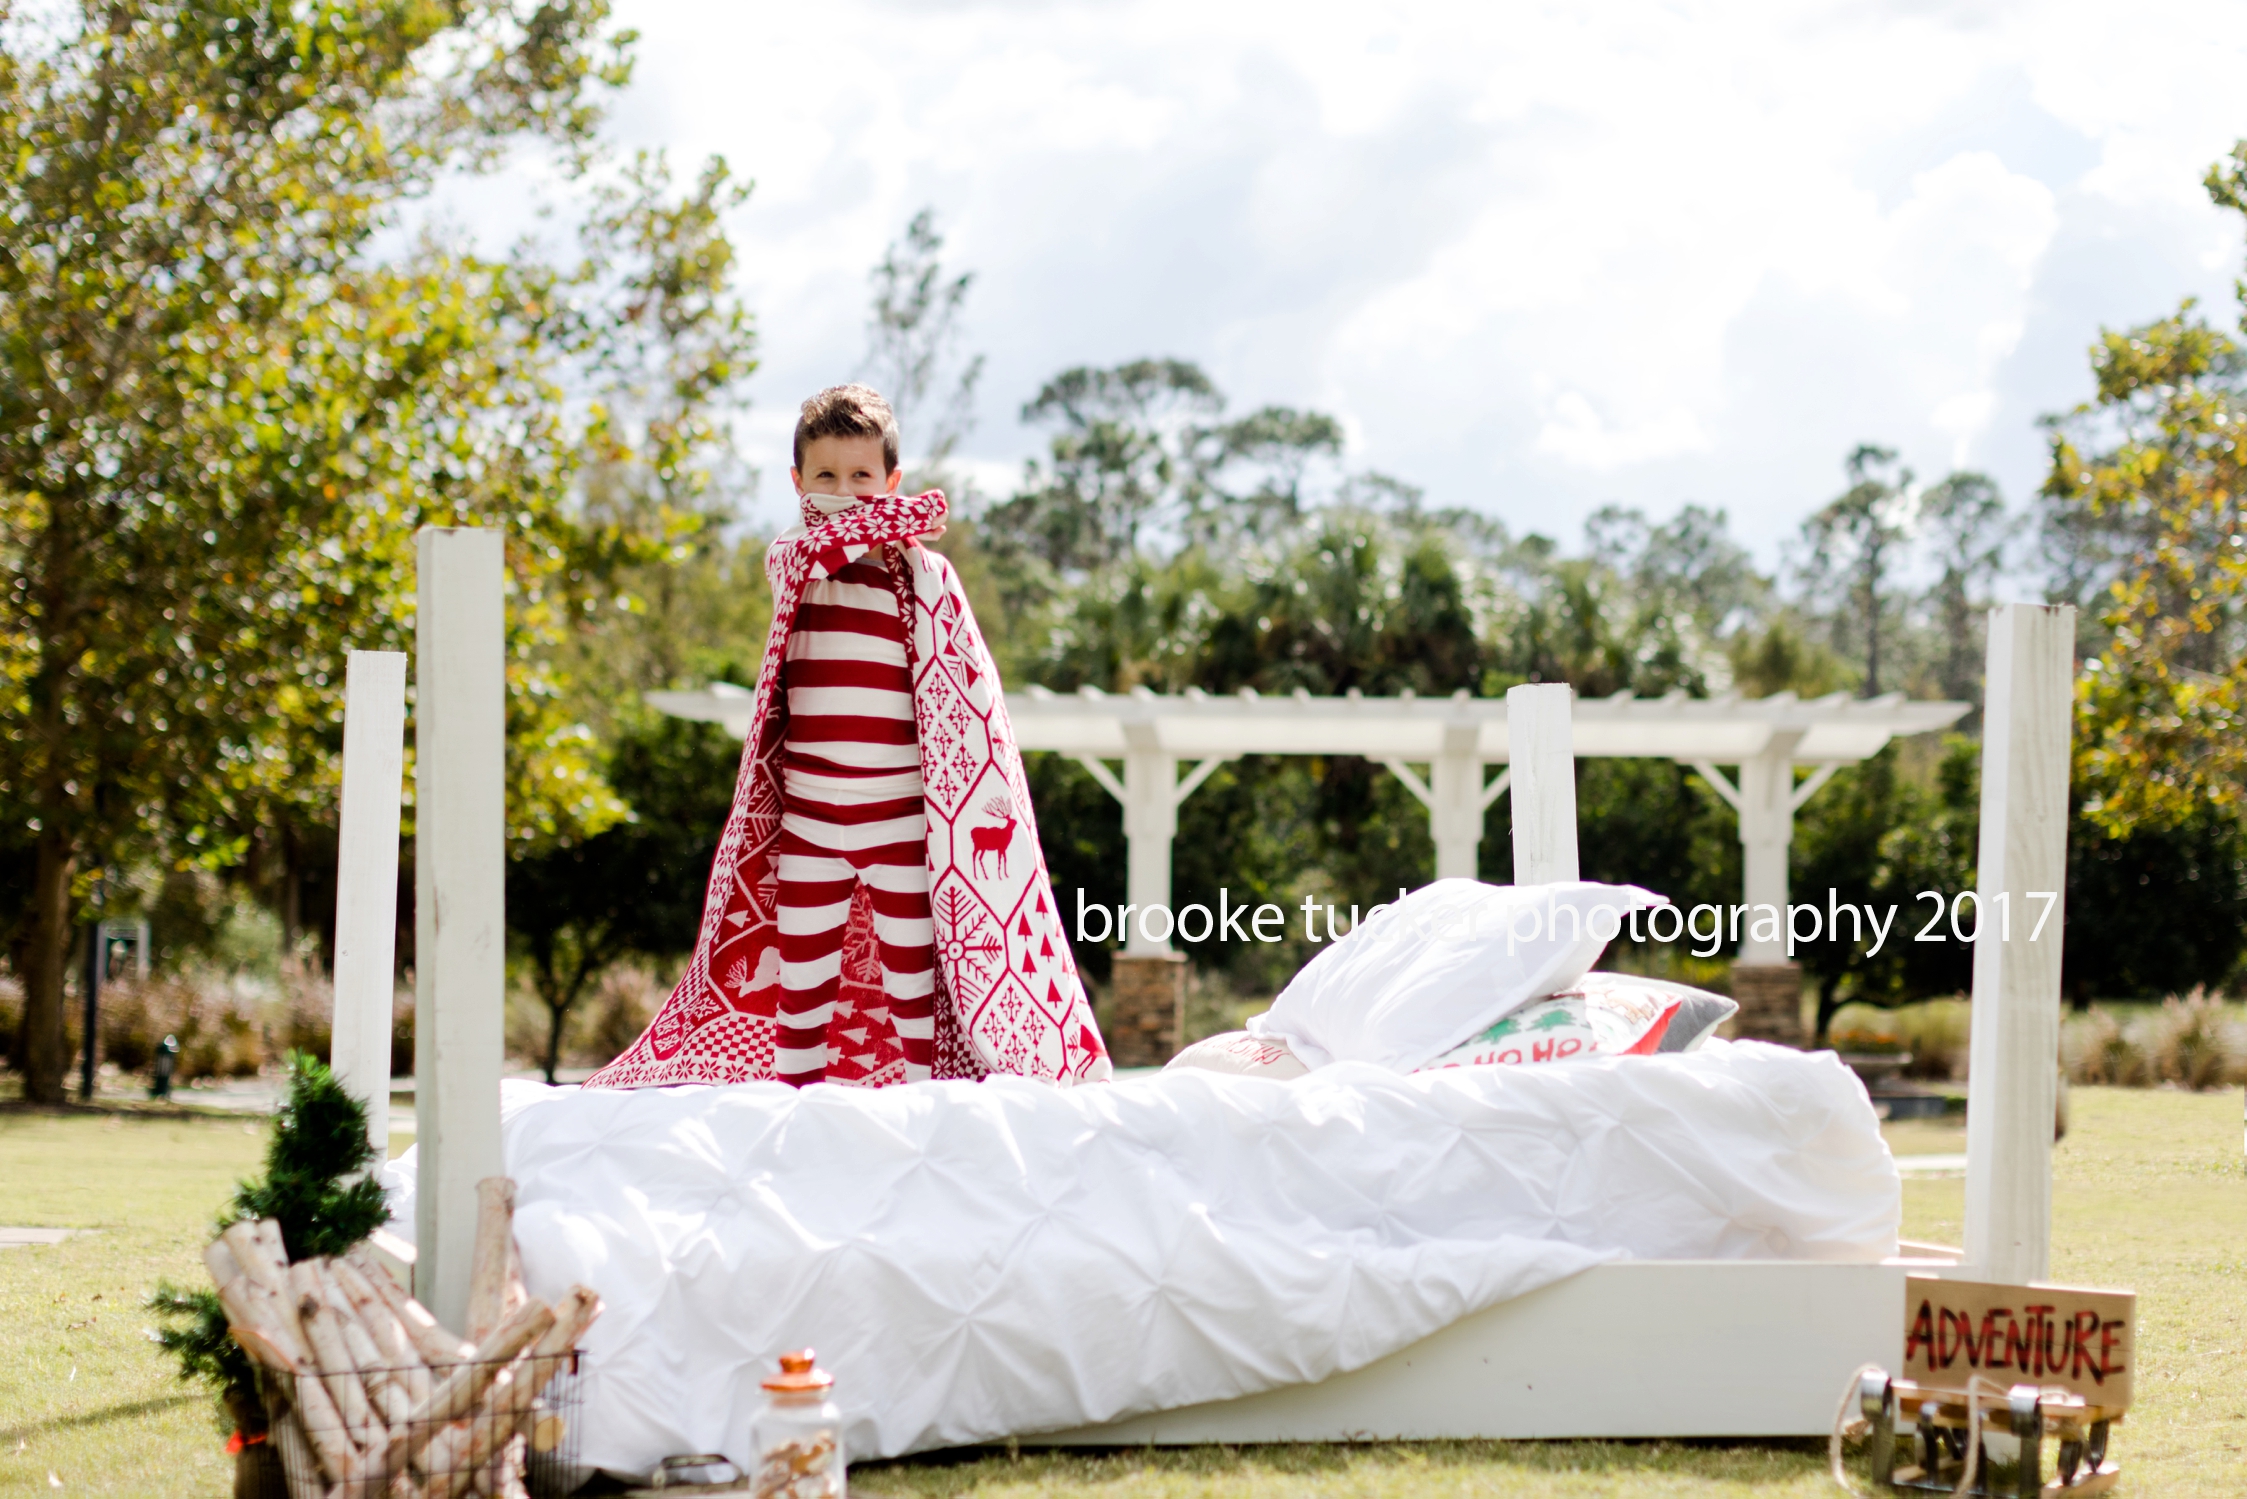 outdoor holiday portraits, holiday pajamas milk and cookies, florida child and family photographer brooke tucker